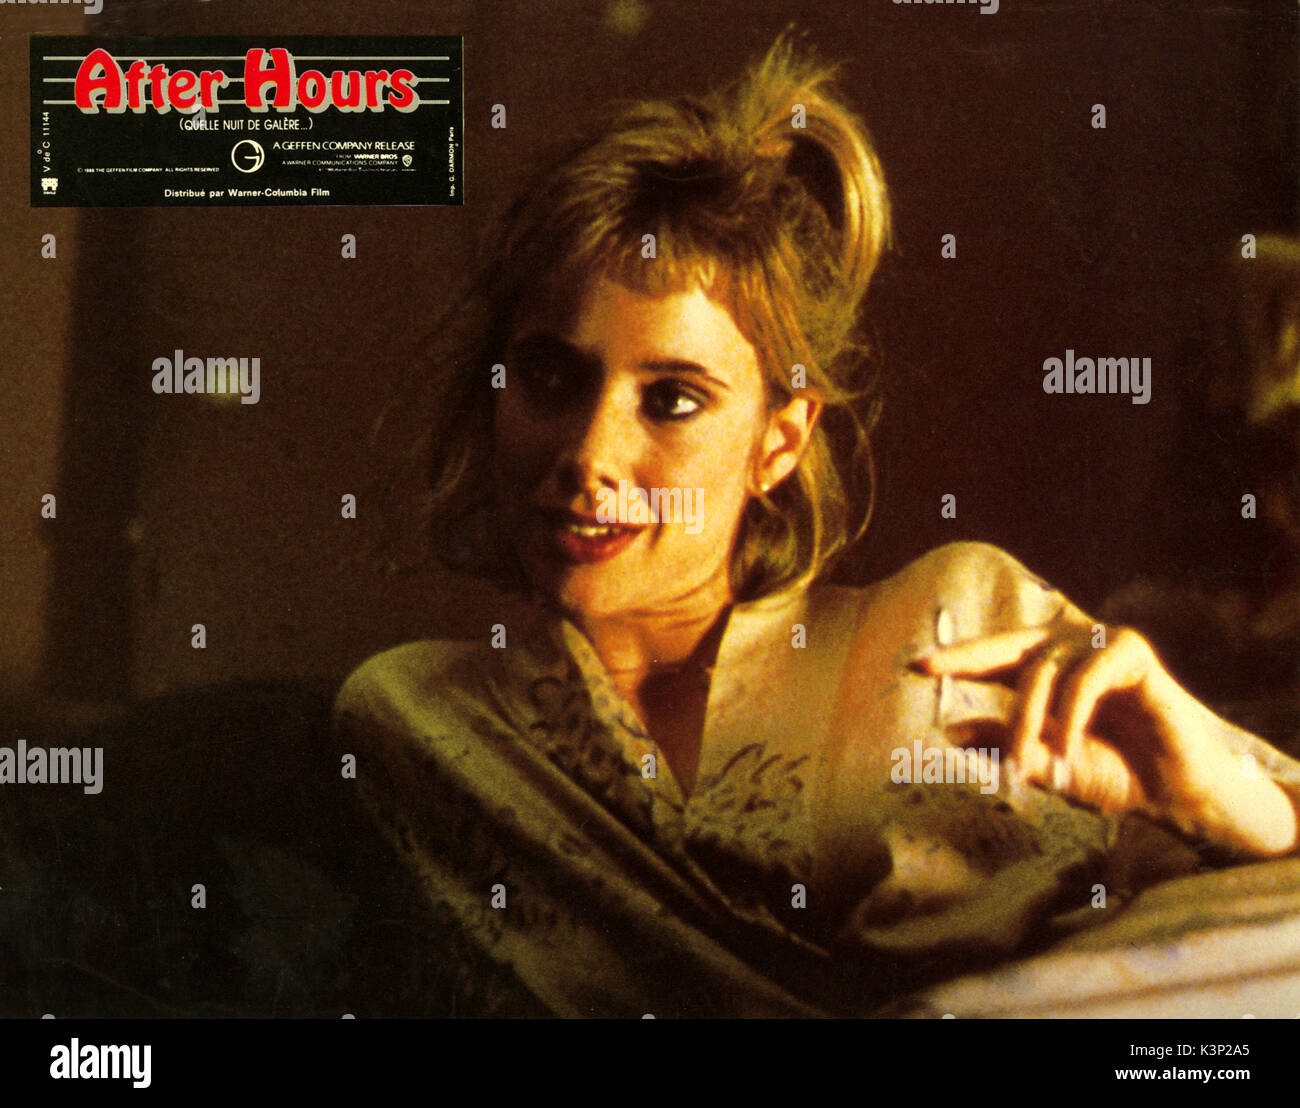 AFTER HOURS [US 1985] PATRICIA ARQUETTE     Date: 1985 Stock Photo